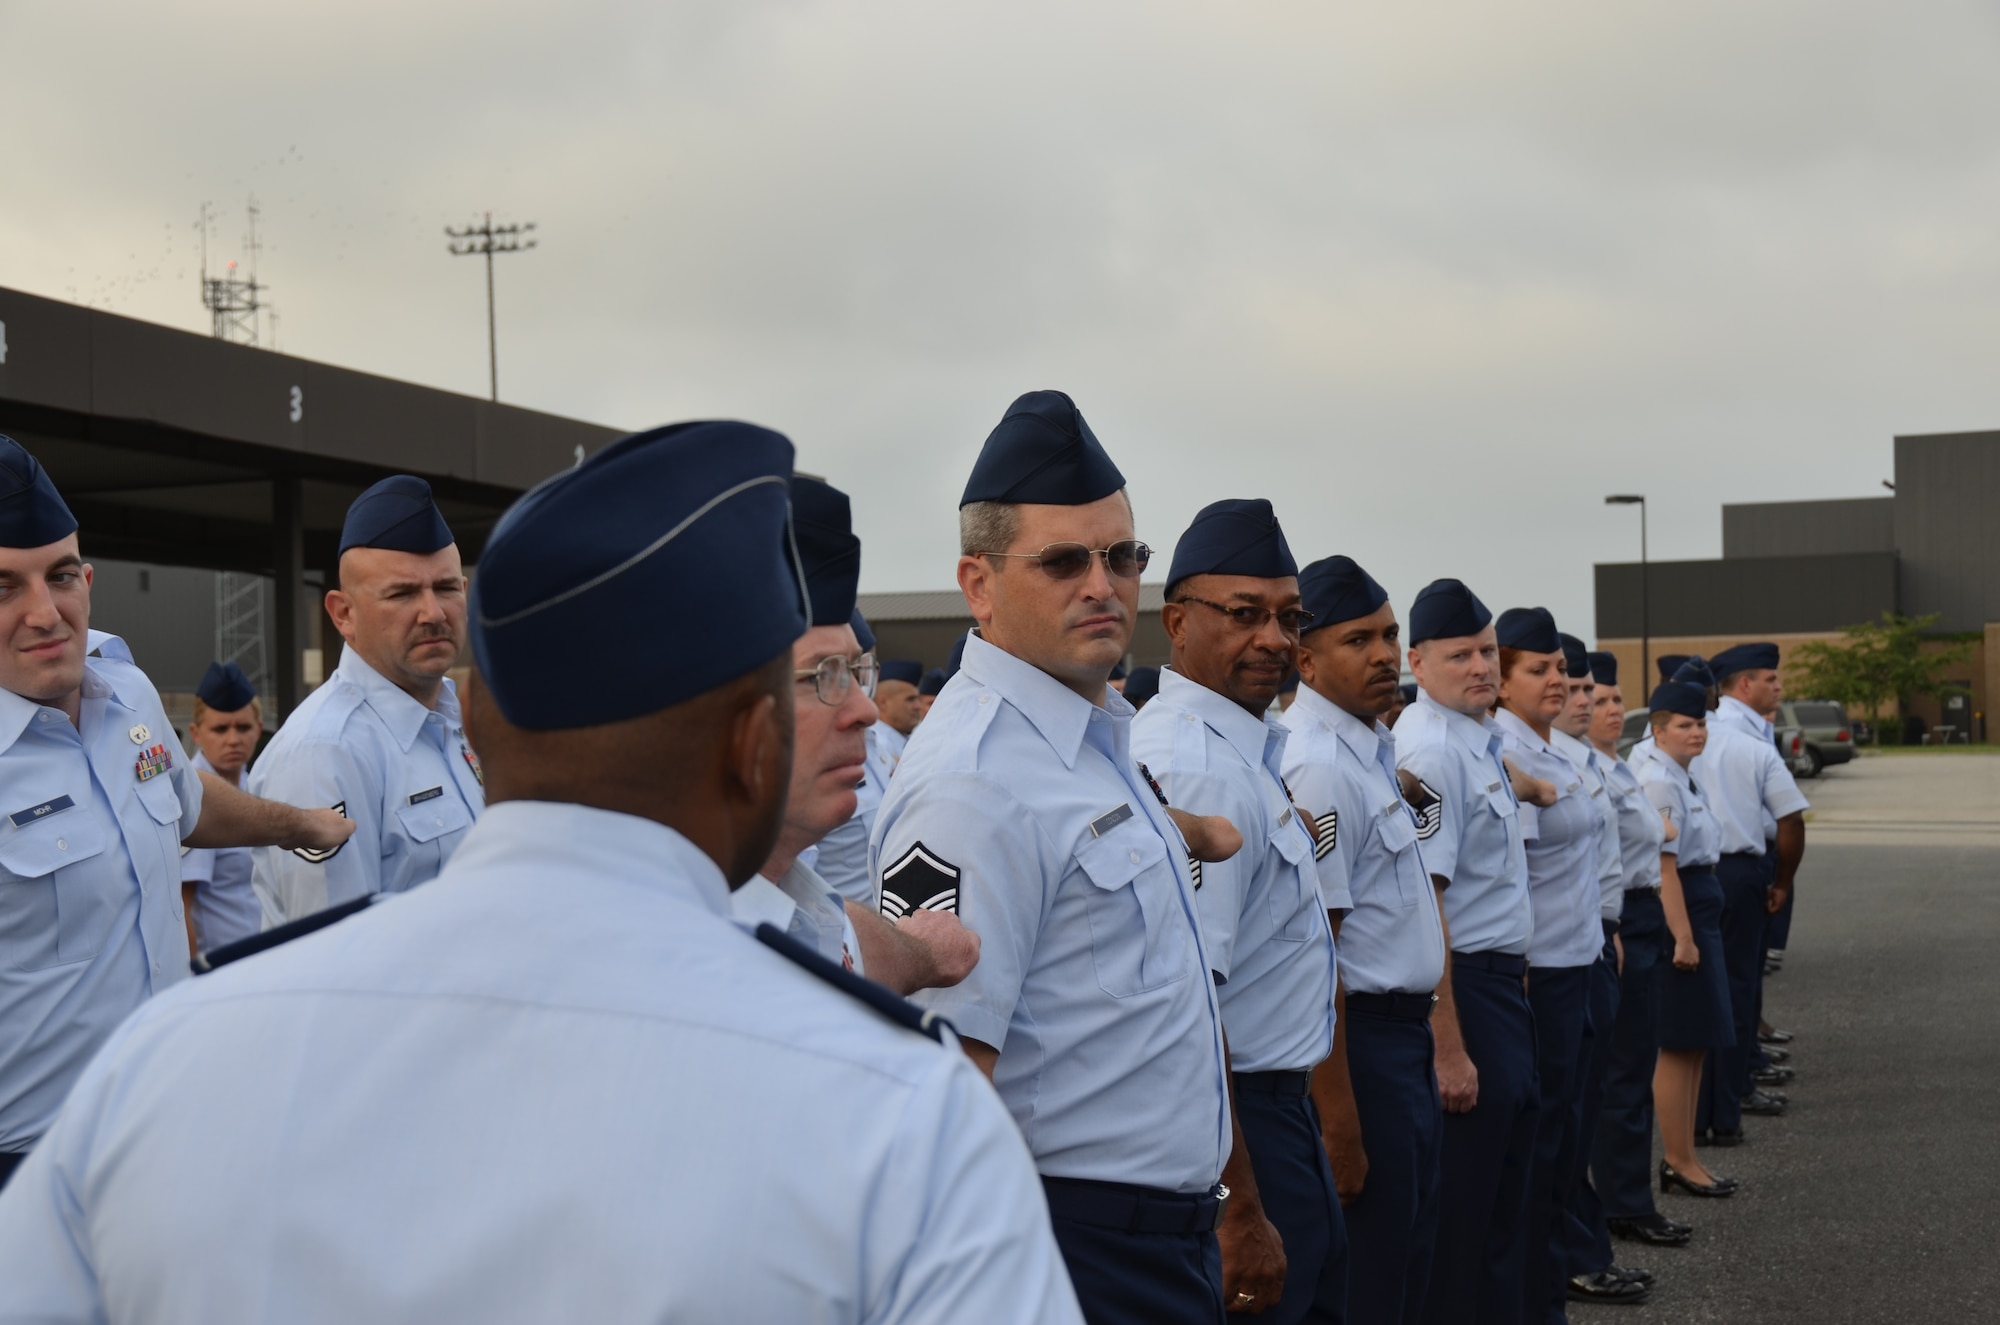 The 175th Logistics Readiness Squadron held a Class B blues inspection on September 8, 2012 at Warfield Air National Guard Base.  The inspection was held to maintain a high level of excellence demonstrating attention to detail. (National Guard photo by Staff Sgt. Nicole Loucas)